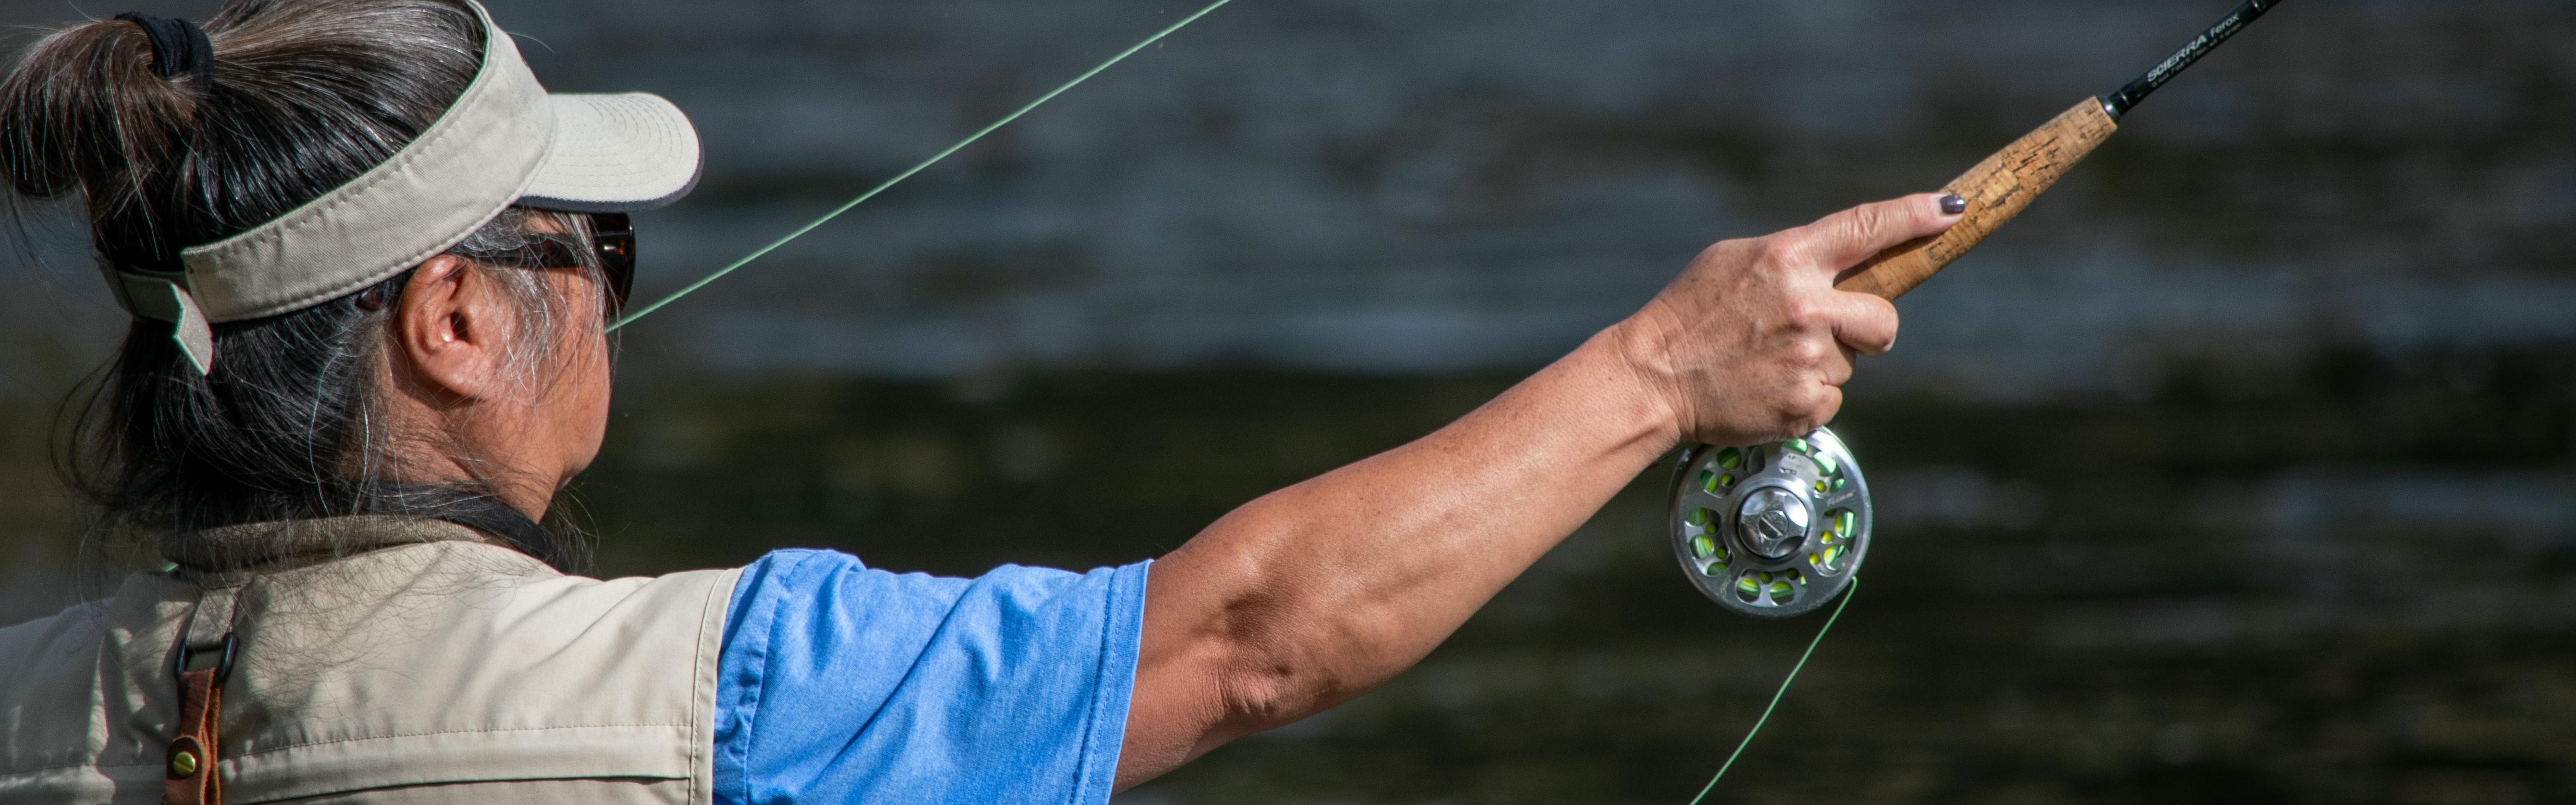 An Expert Guide to Fly Fishing Tippet Size